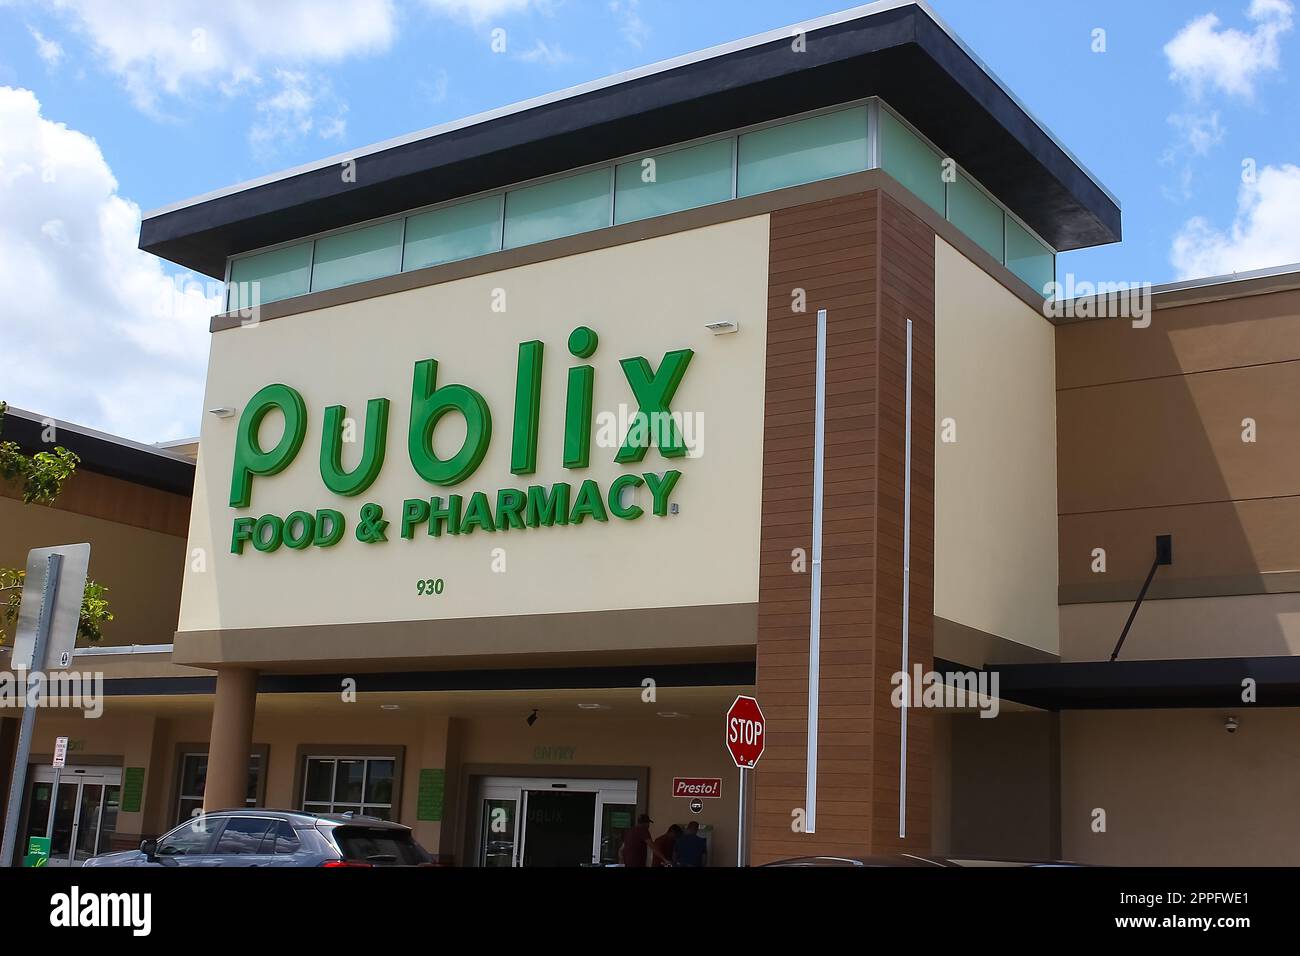 Publix food and pharmacy store in Miami, Florida, USA Stock Photo